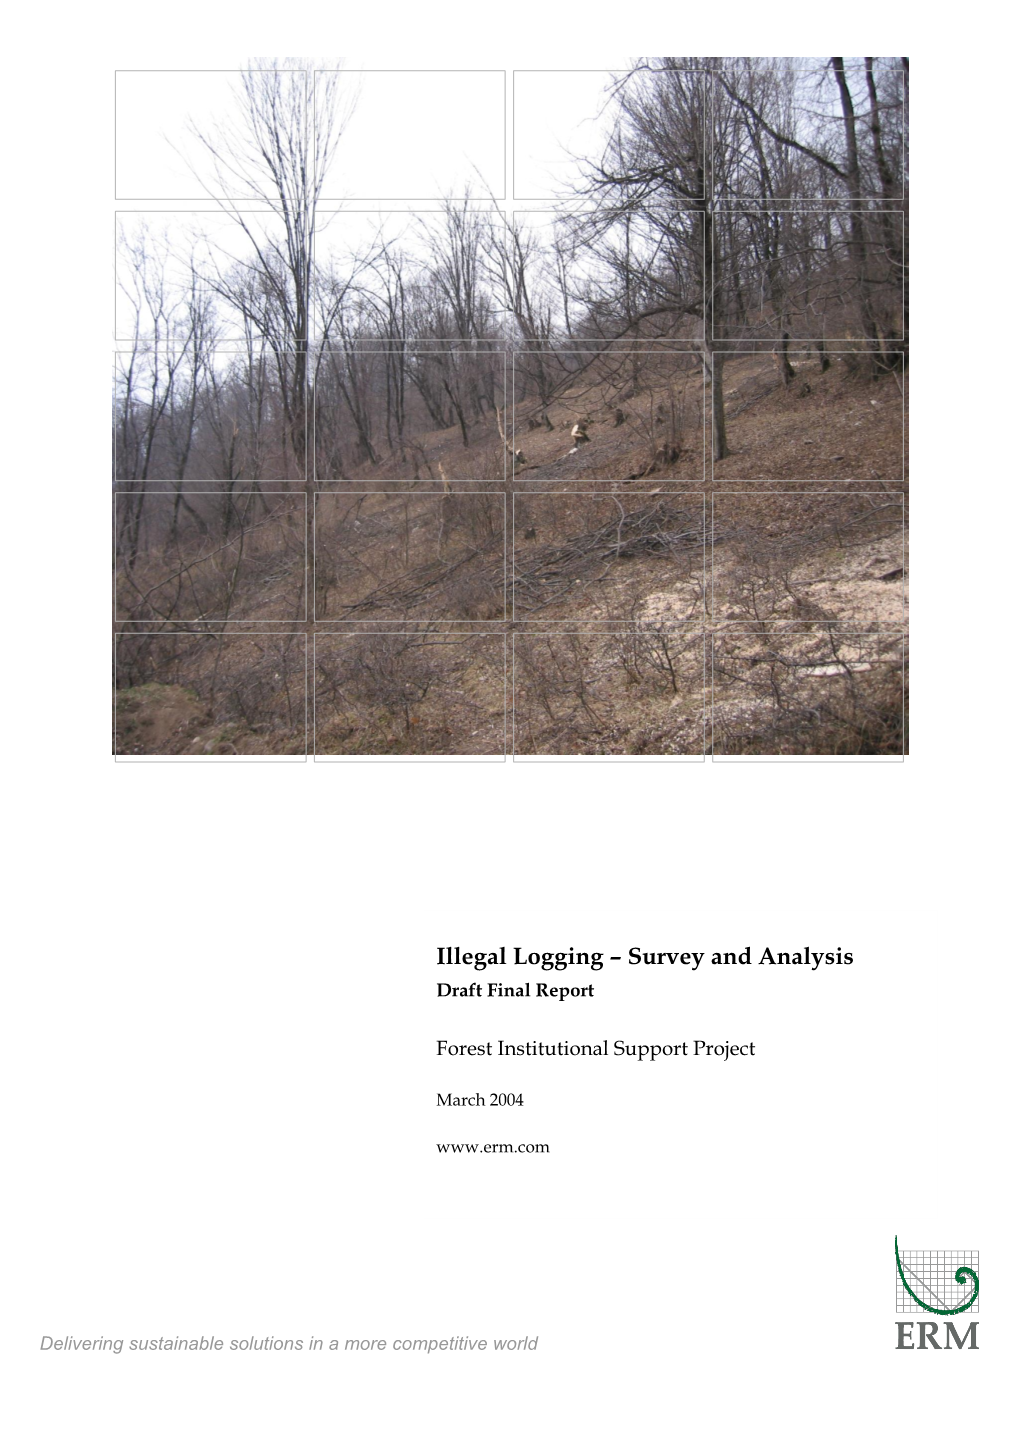 Illegal Logging – Survey and Analysis Draft Final Report